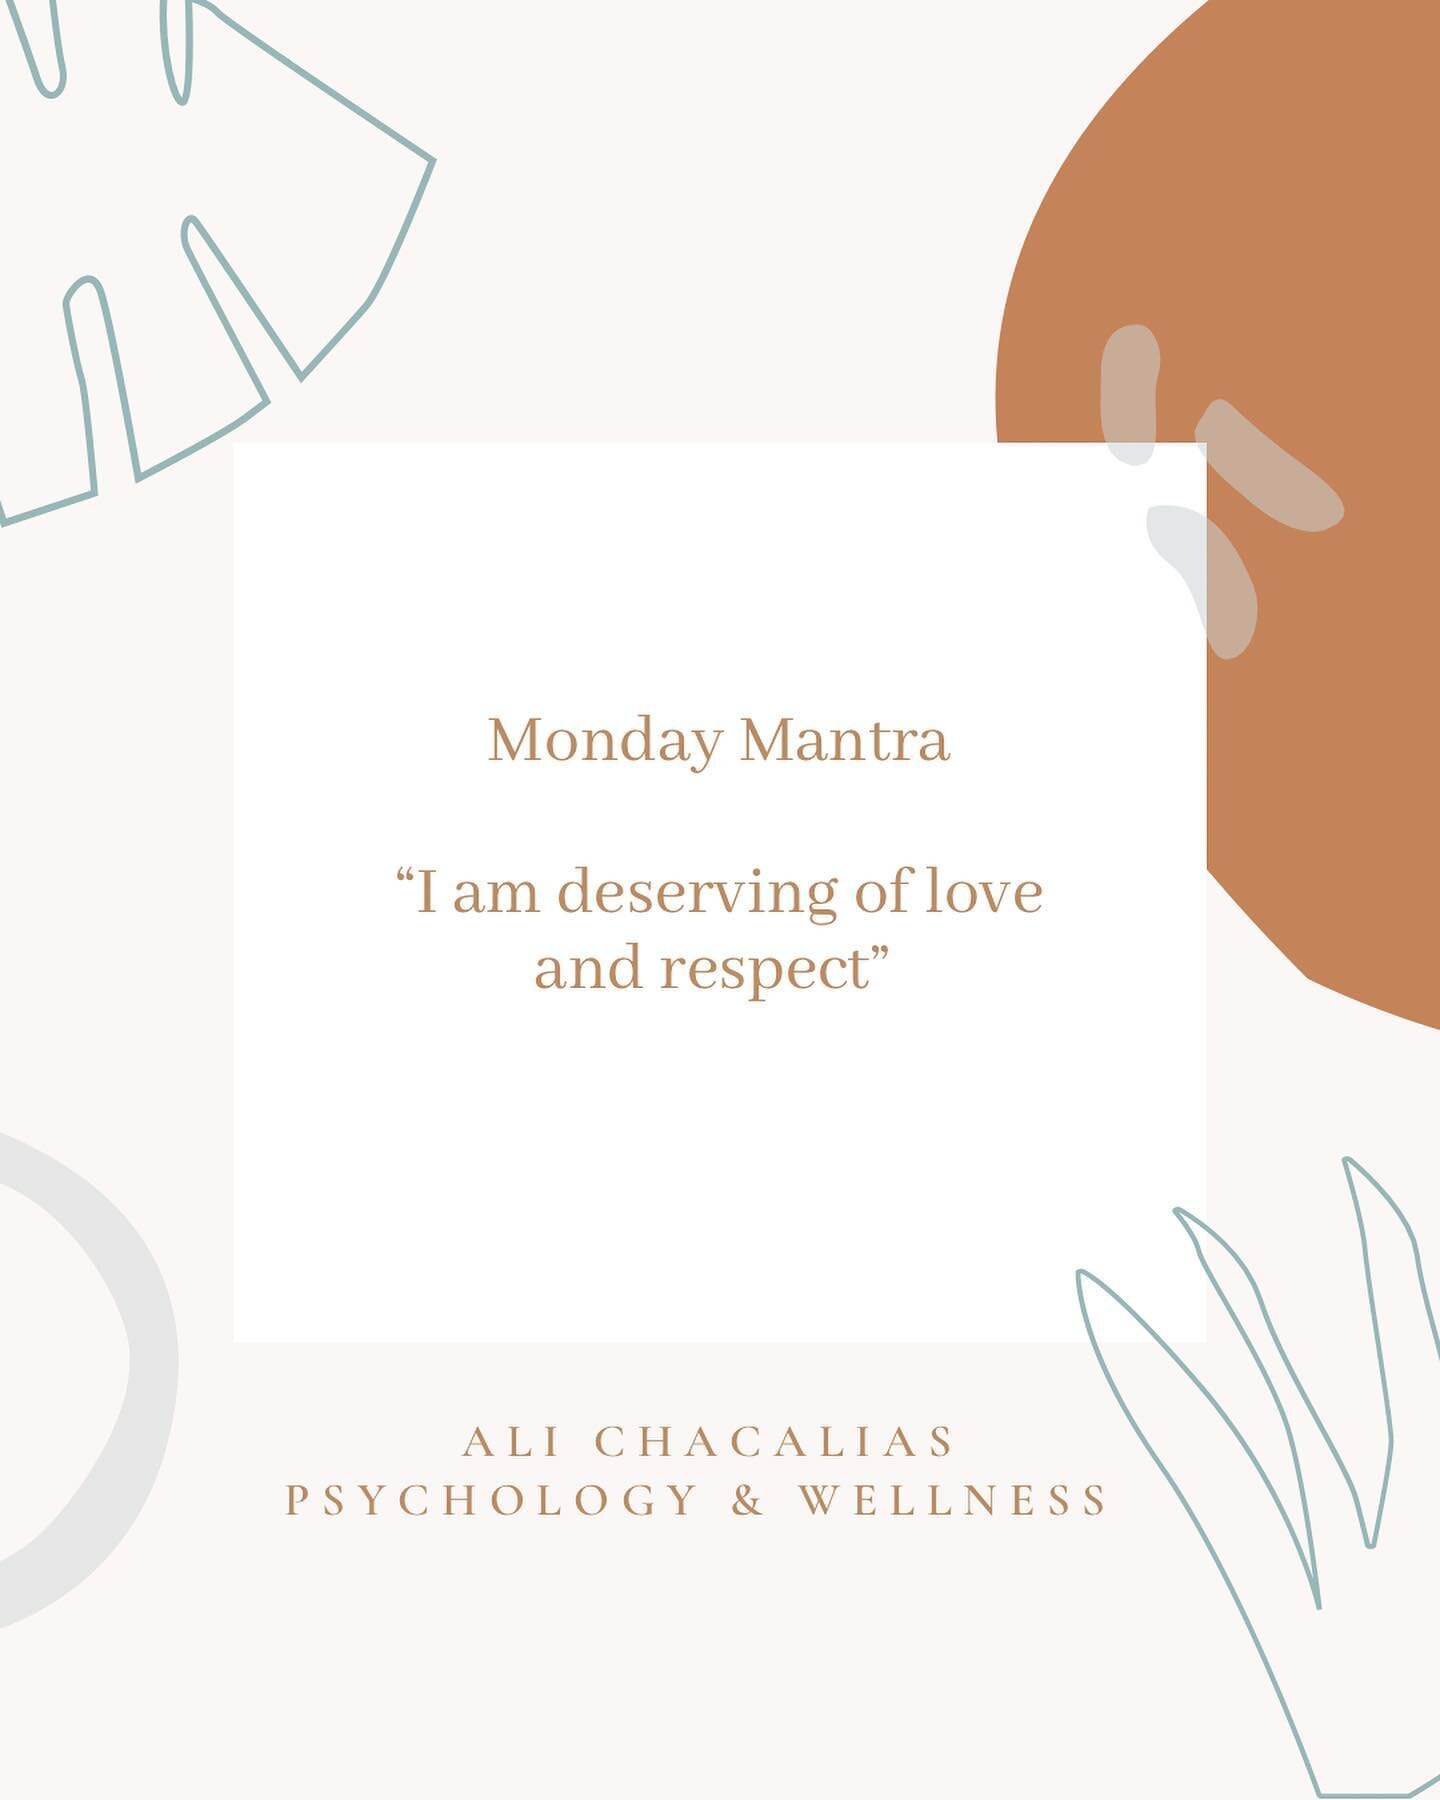 Monday mantra! Choose the mantra that you want to guide your week✨

Mantras, like intentions or affirmations, help us plant the seeds for intentional changes in limiting patterns of beliefs or behaviors. You got this💪🏻
&bull;
&bull;
&bull;
#wellnes